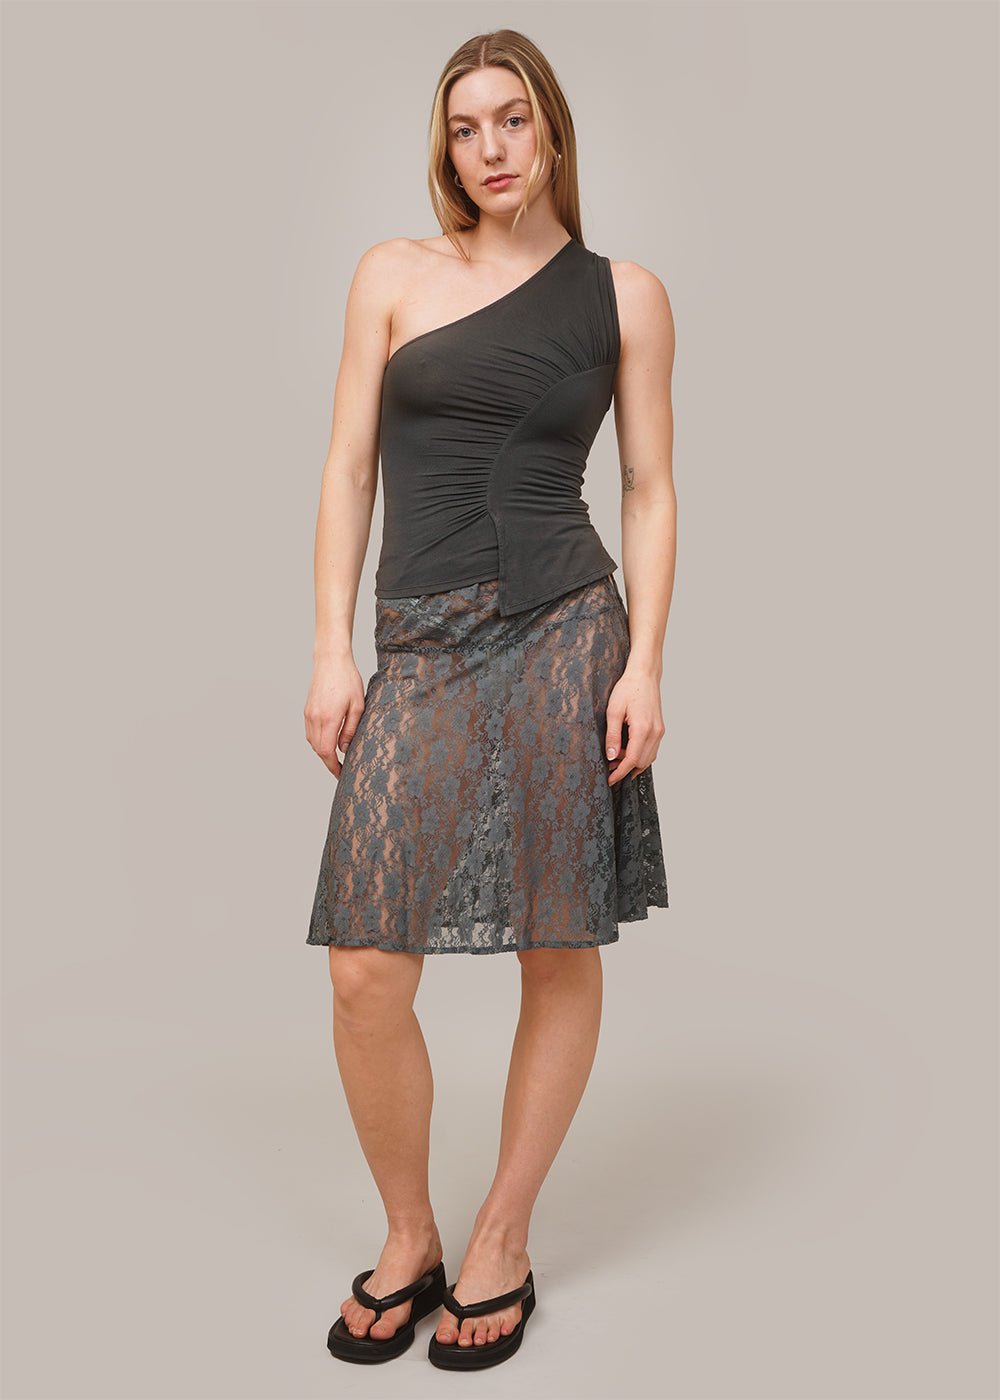 Belle The Label Slate Willa Skirt - New Classics Studios Sustainable Ethical Fashion Canada